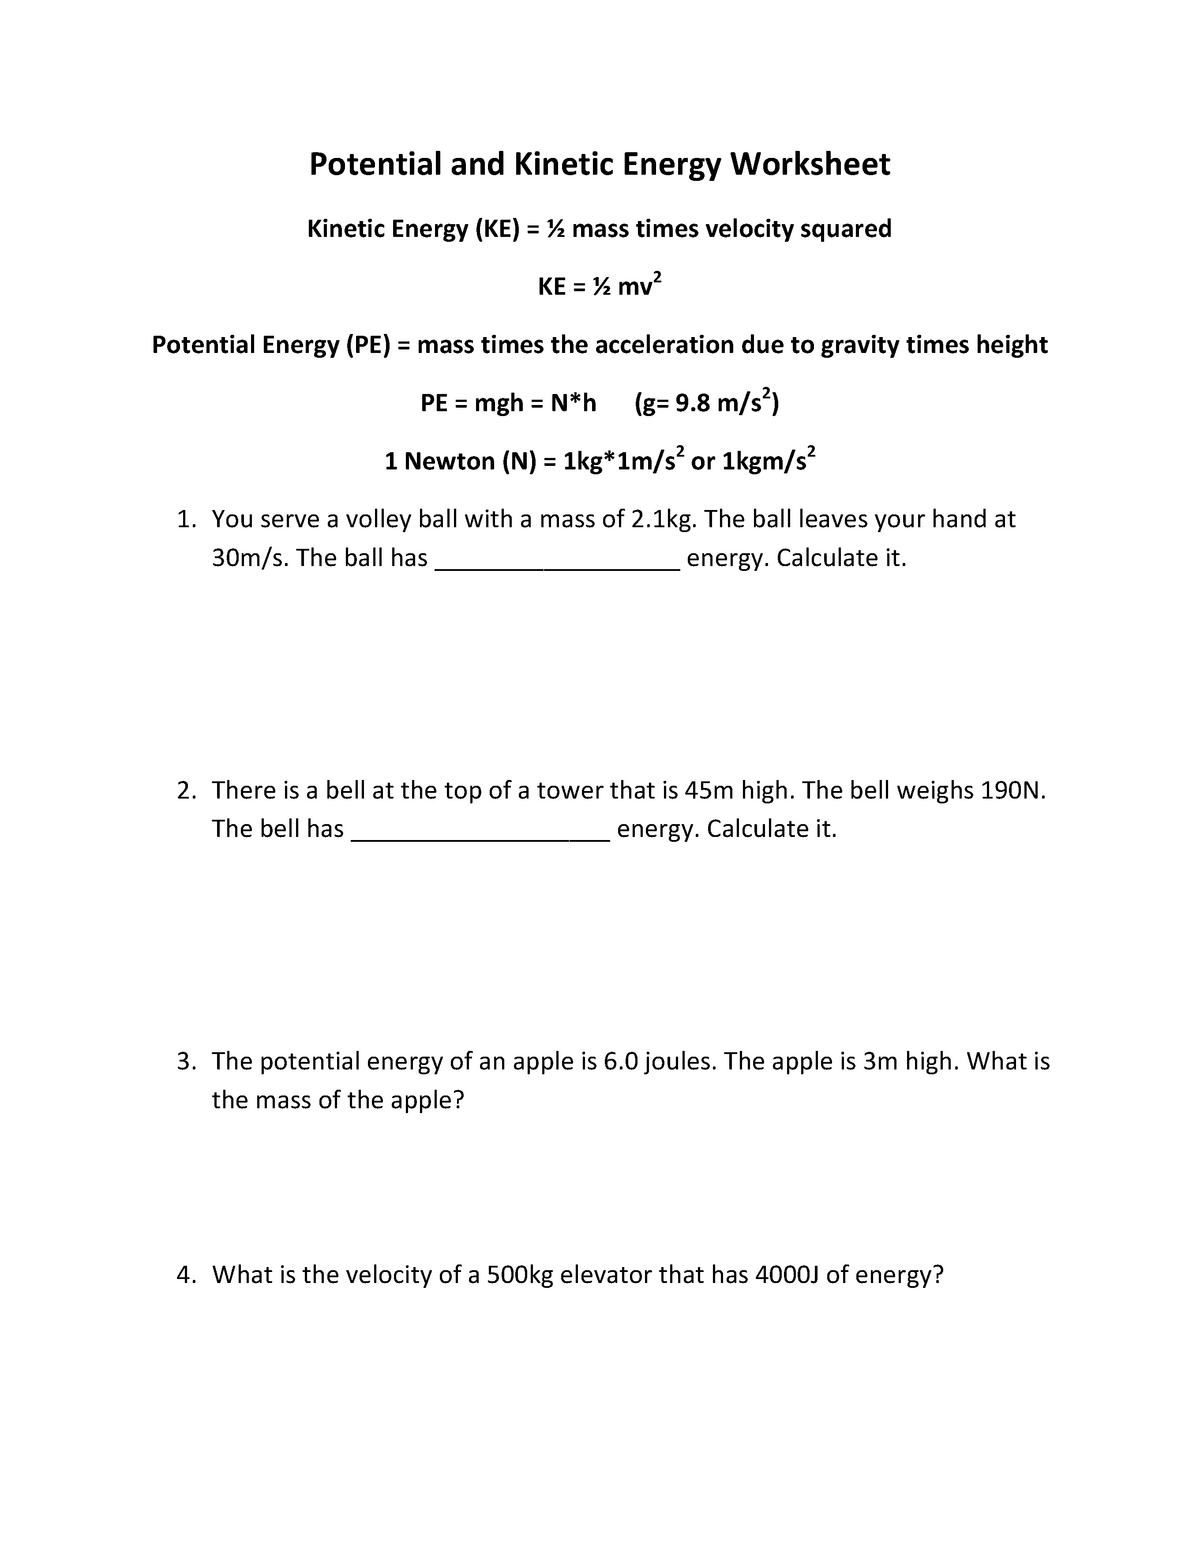 Potential and Kinetic Energy Worksheet - science - 25 - UAEU With Potential Vs Kinetic Energy Worksheet